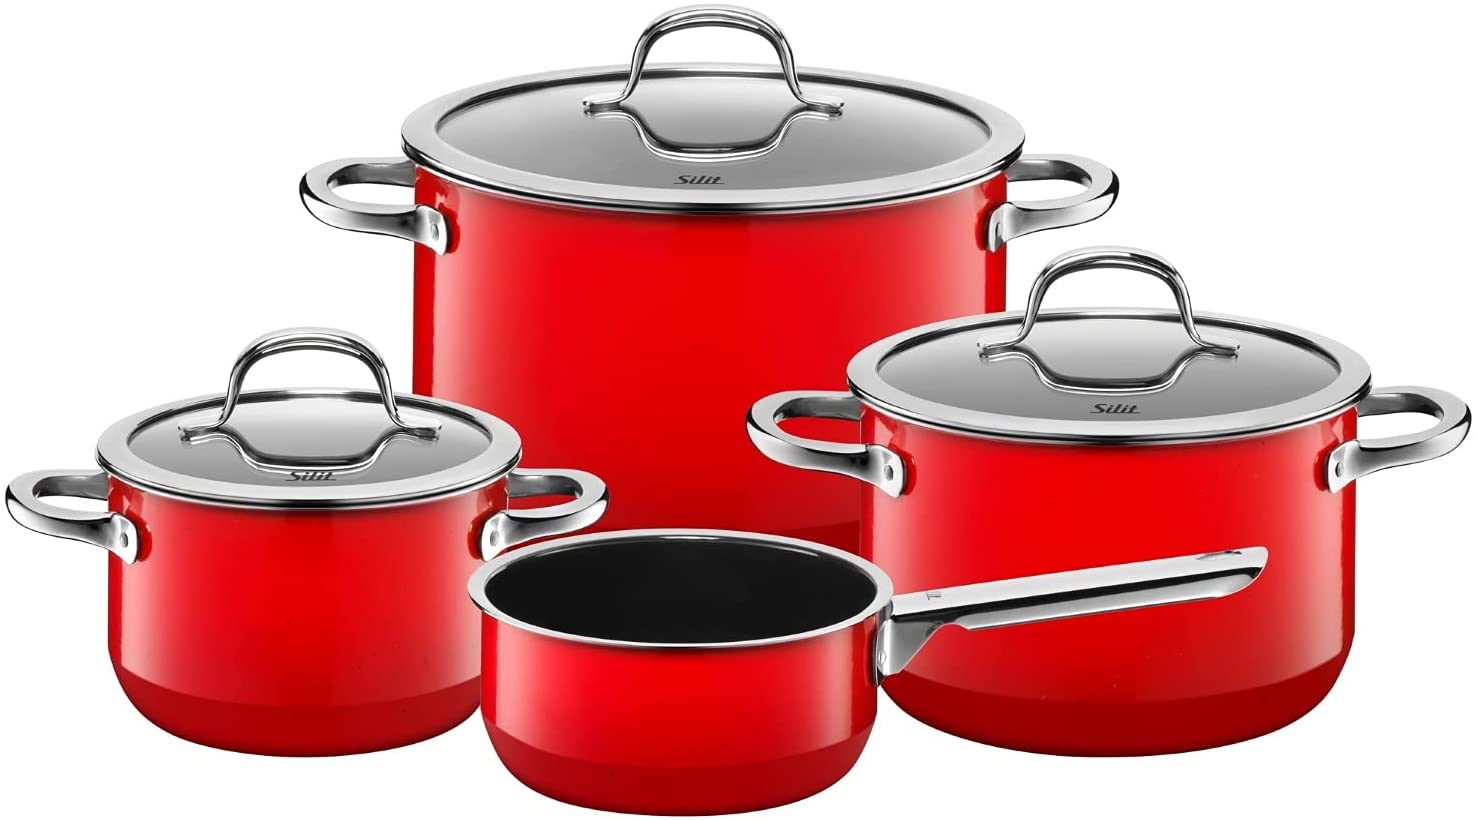 Silit Passion 2109297383 Cookware 4 Piece Set Red